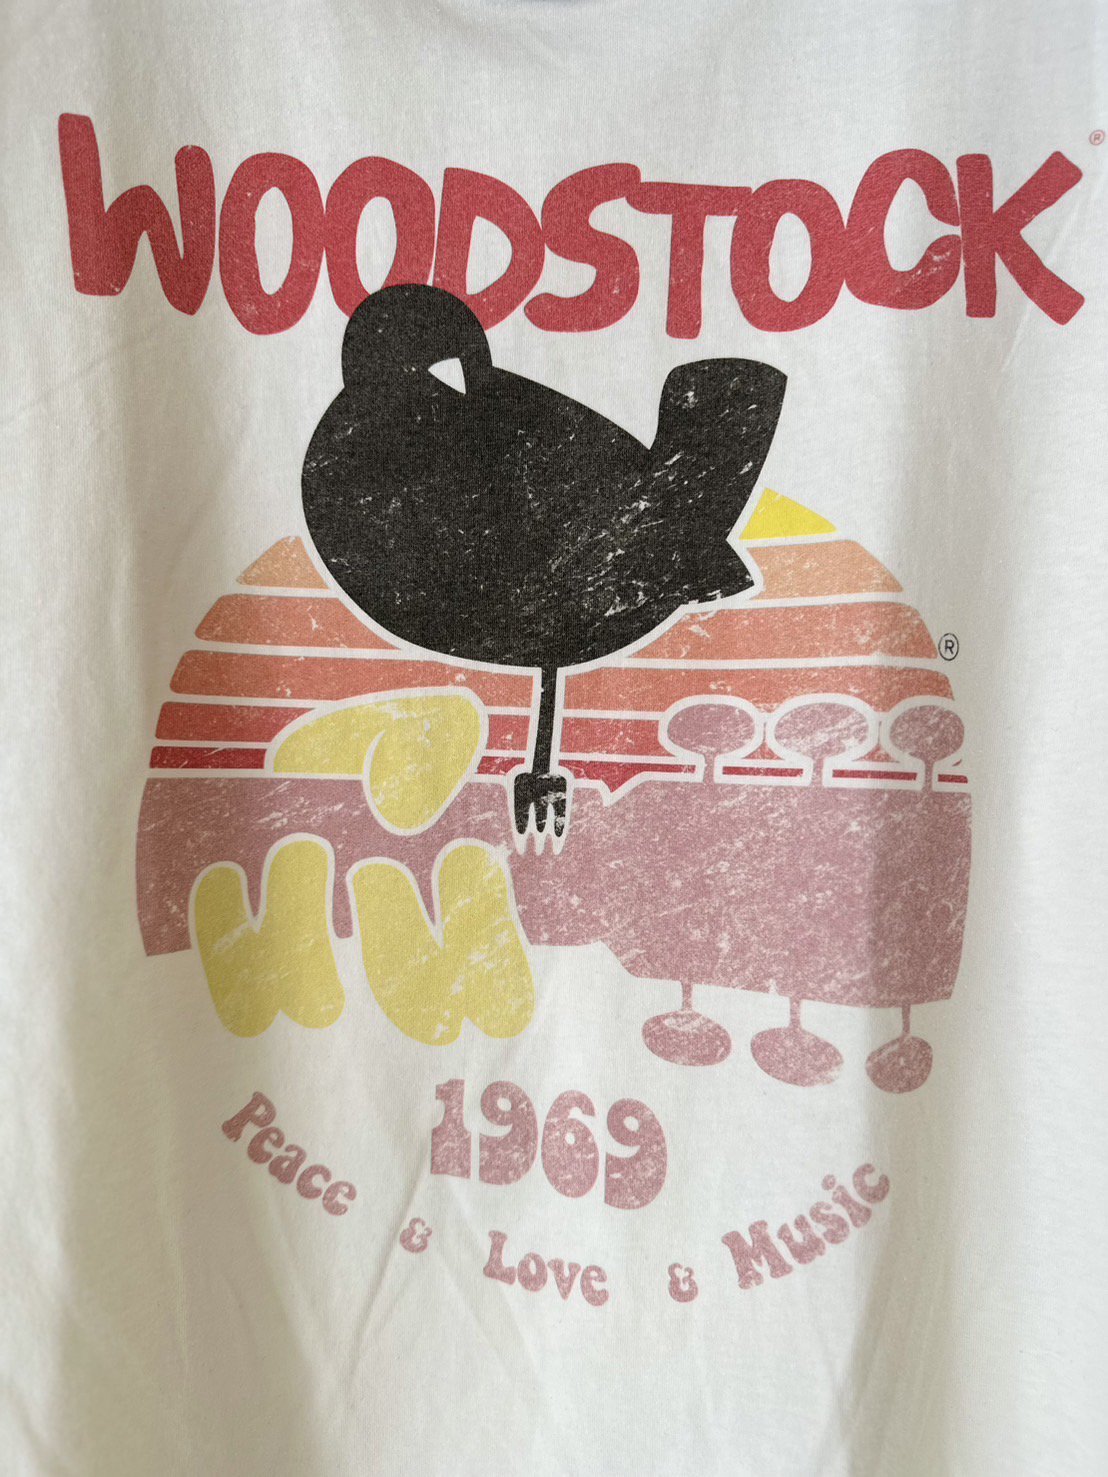 BLUESCENTRIC<br />WOODSTOCK BIRD & GUITAR RINGER TEE / NATURAL<img class='new_mark_img2' src='https://img.shop-pro.jp/img/new/icons47.gif' style='border:none;display:inline;margin:0px;padding:0px;width:auto;' />